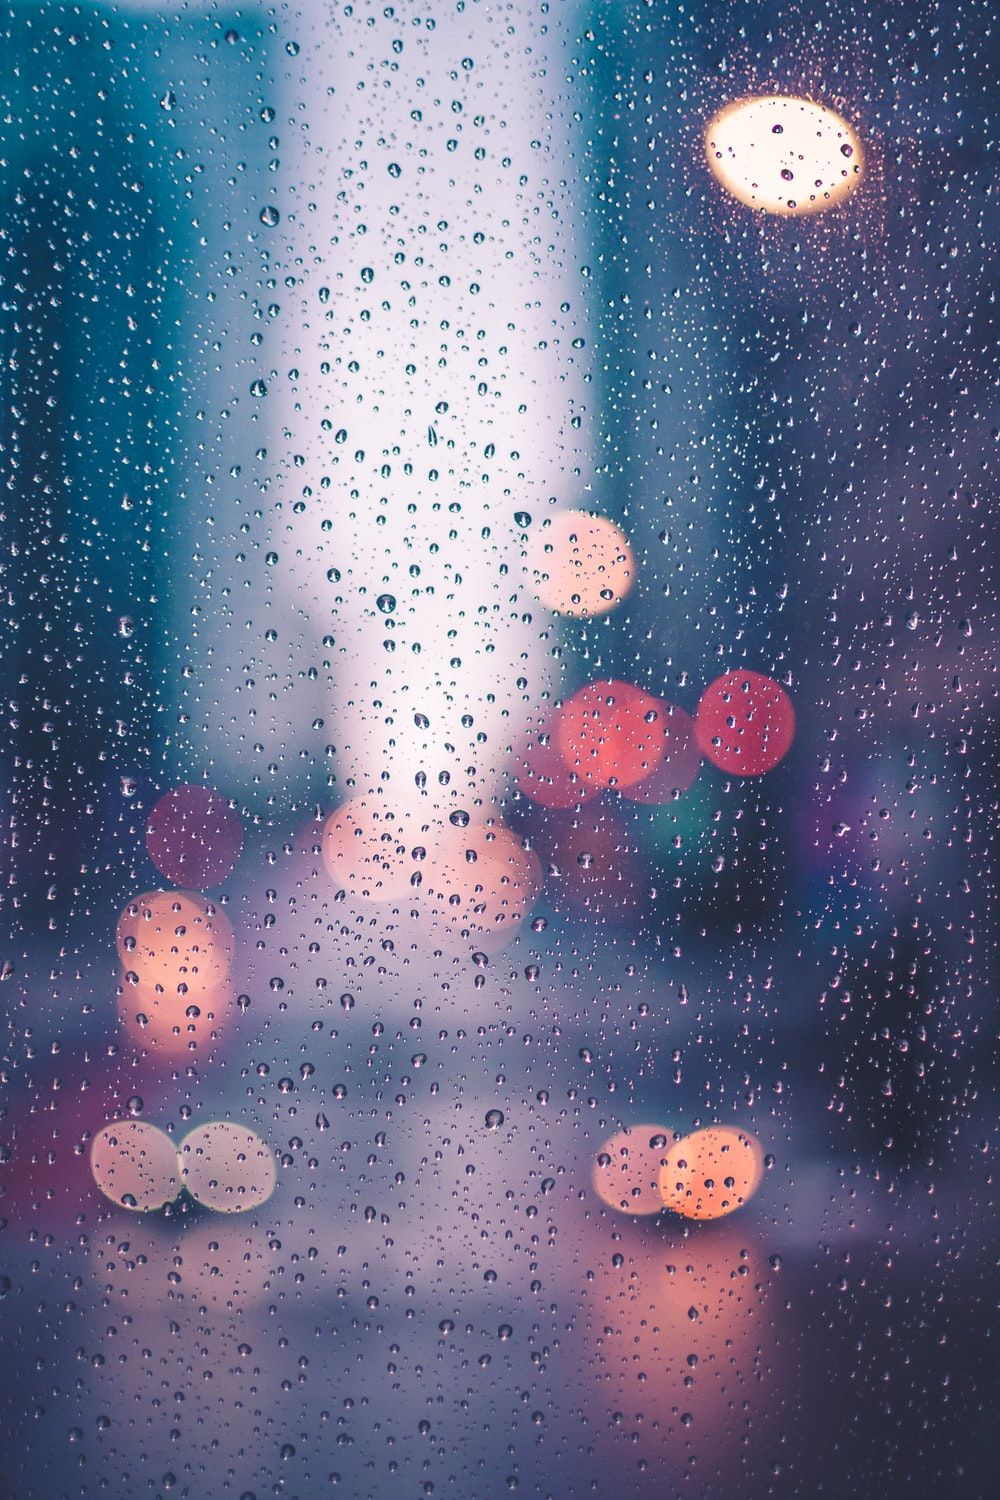 A rain covered window with city lights in the background - Rain